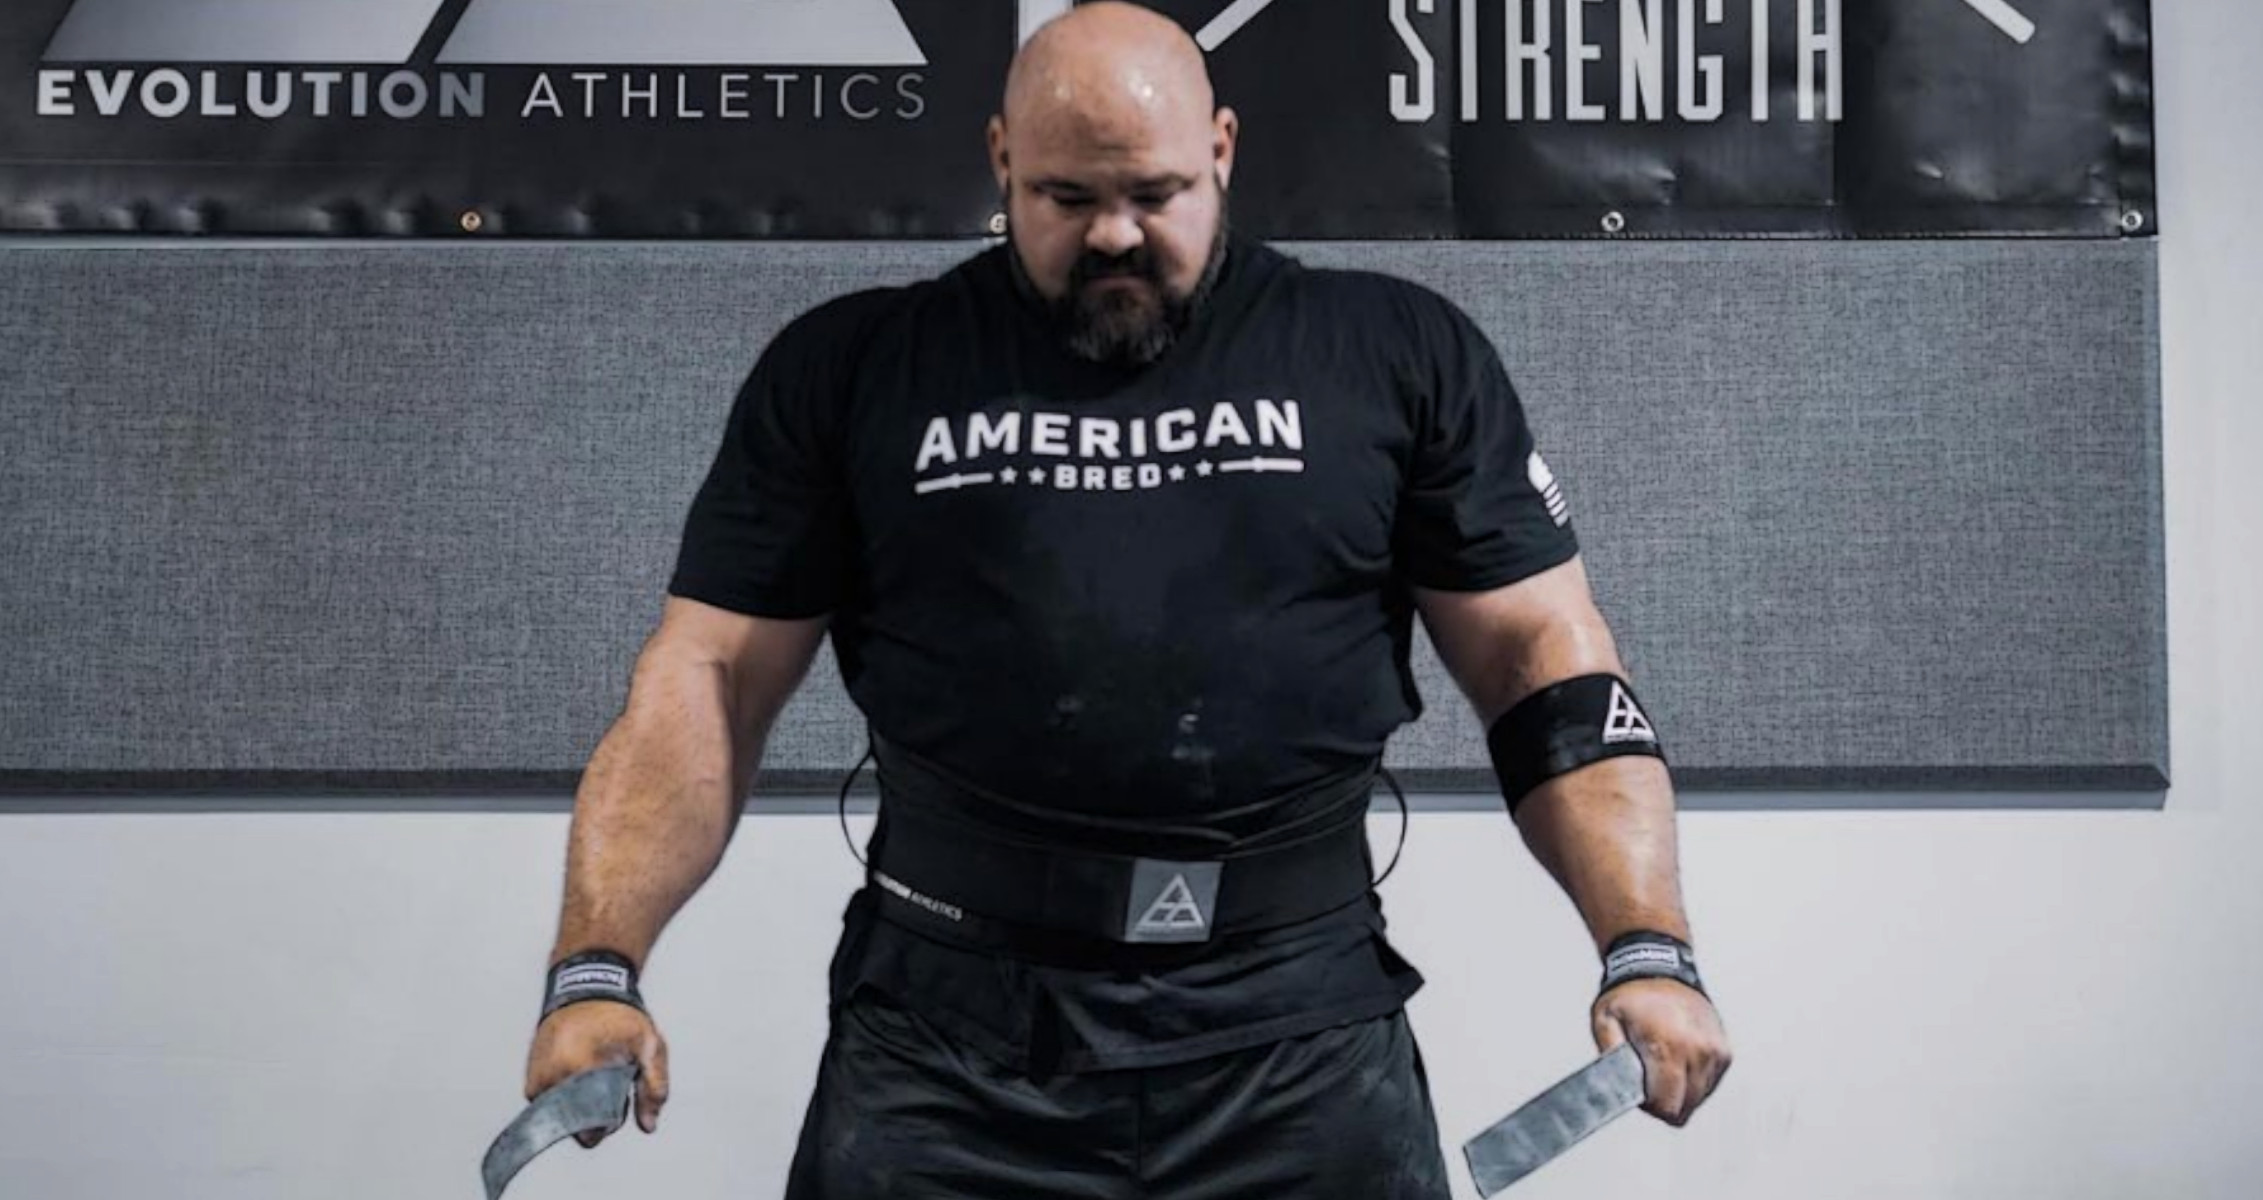 After Placing Fifth at the World's Strongest Man, Brian Shaw Considers